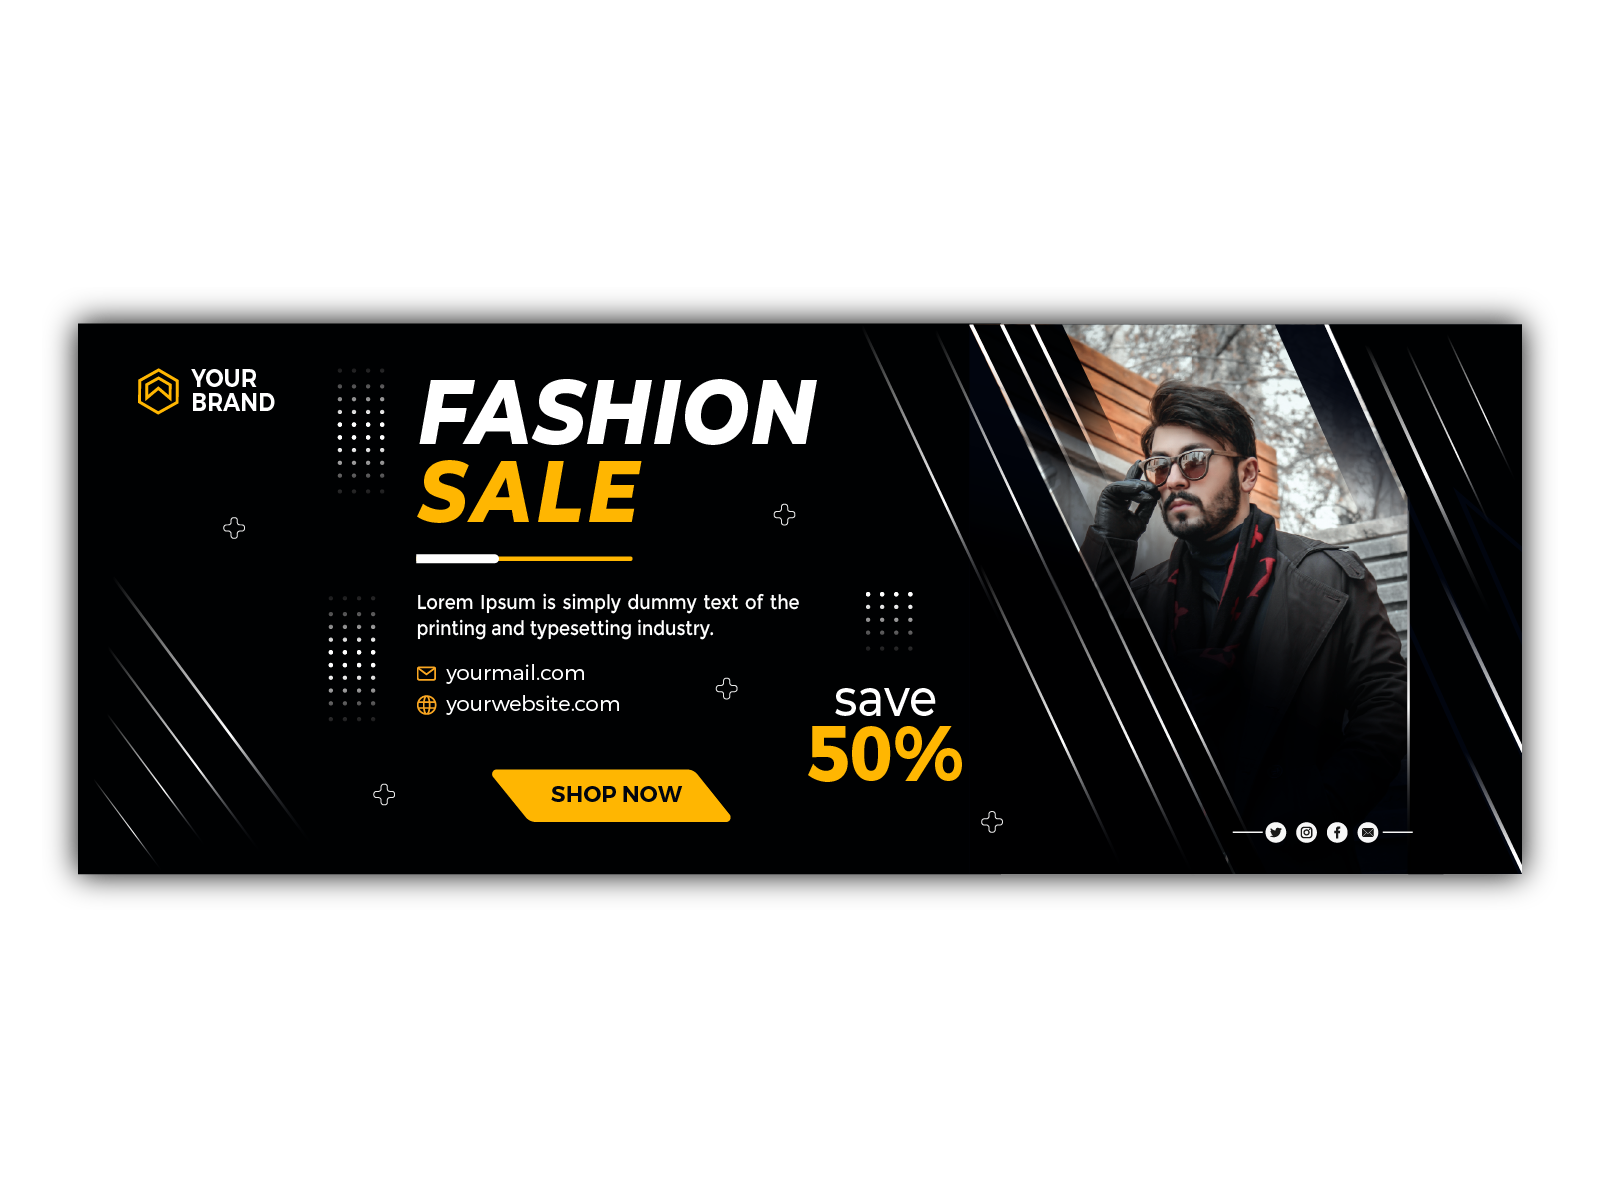 Fashion sale facebook timeline cover and banner template design by Md Rakib  Islam on Dribbble